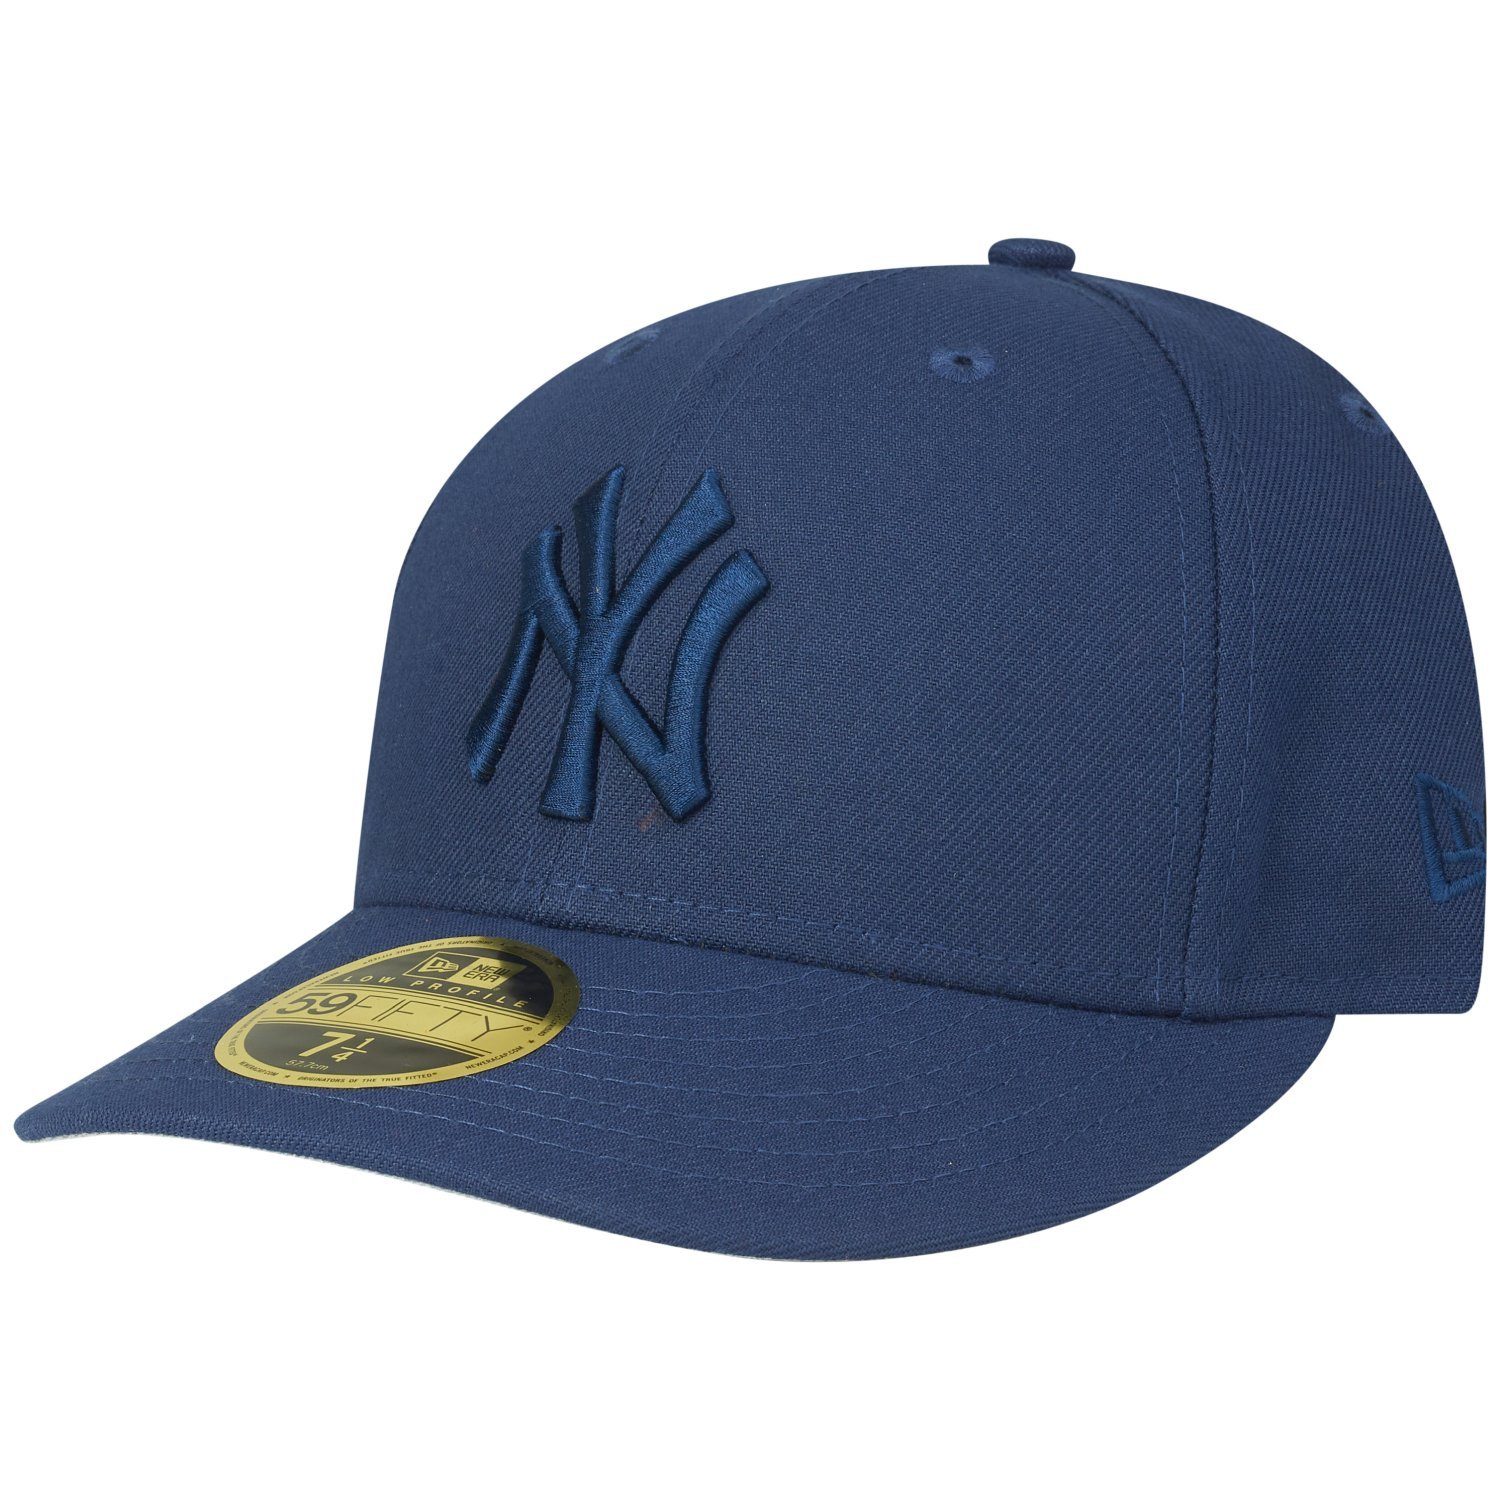 New Navy Cap Fitted New Era Profile 59Fifty Yankees York Low